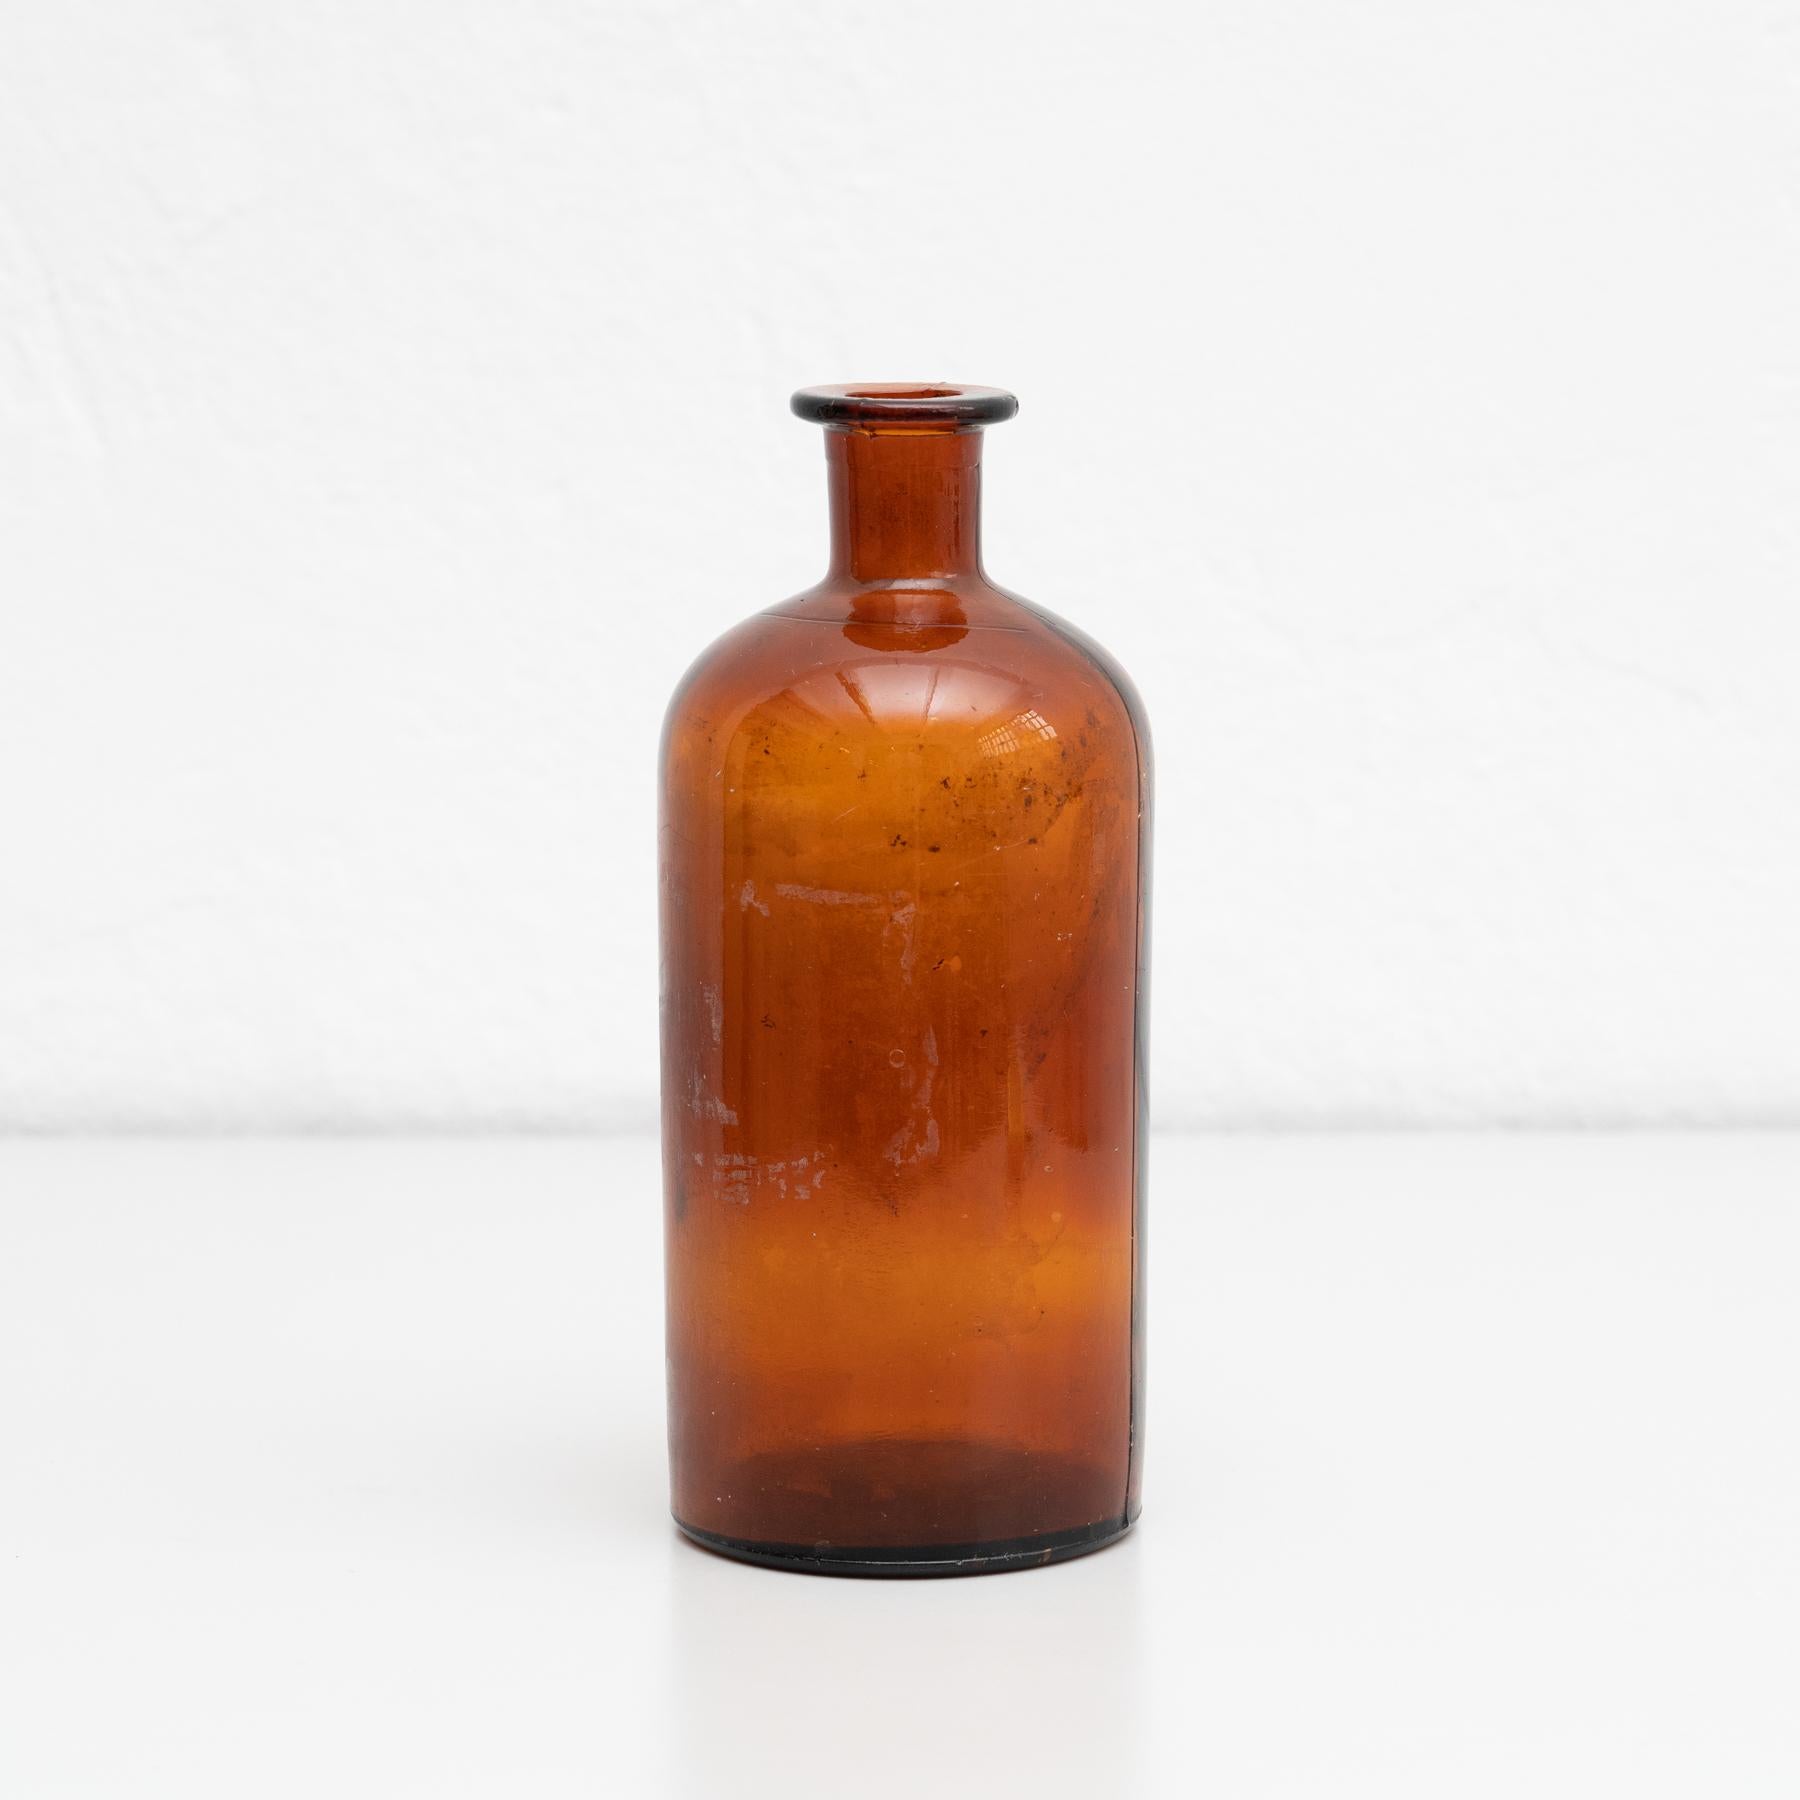 Mid-20th century amber apothecary glass bottle.

By unknown manufacturer from France.

In original condition, with minor wear consistent with age and use, preserving a beautiful patina.

Materials:
Amber glass.
 